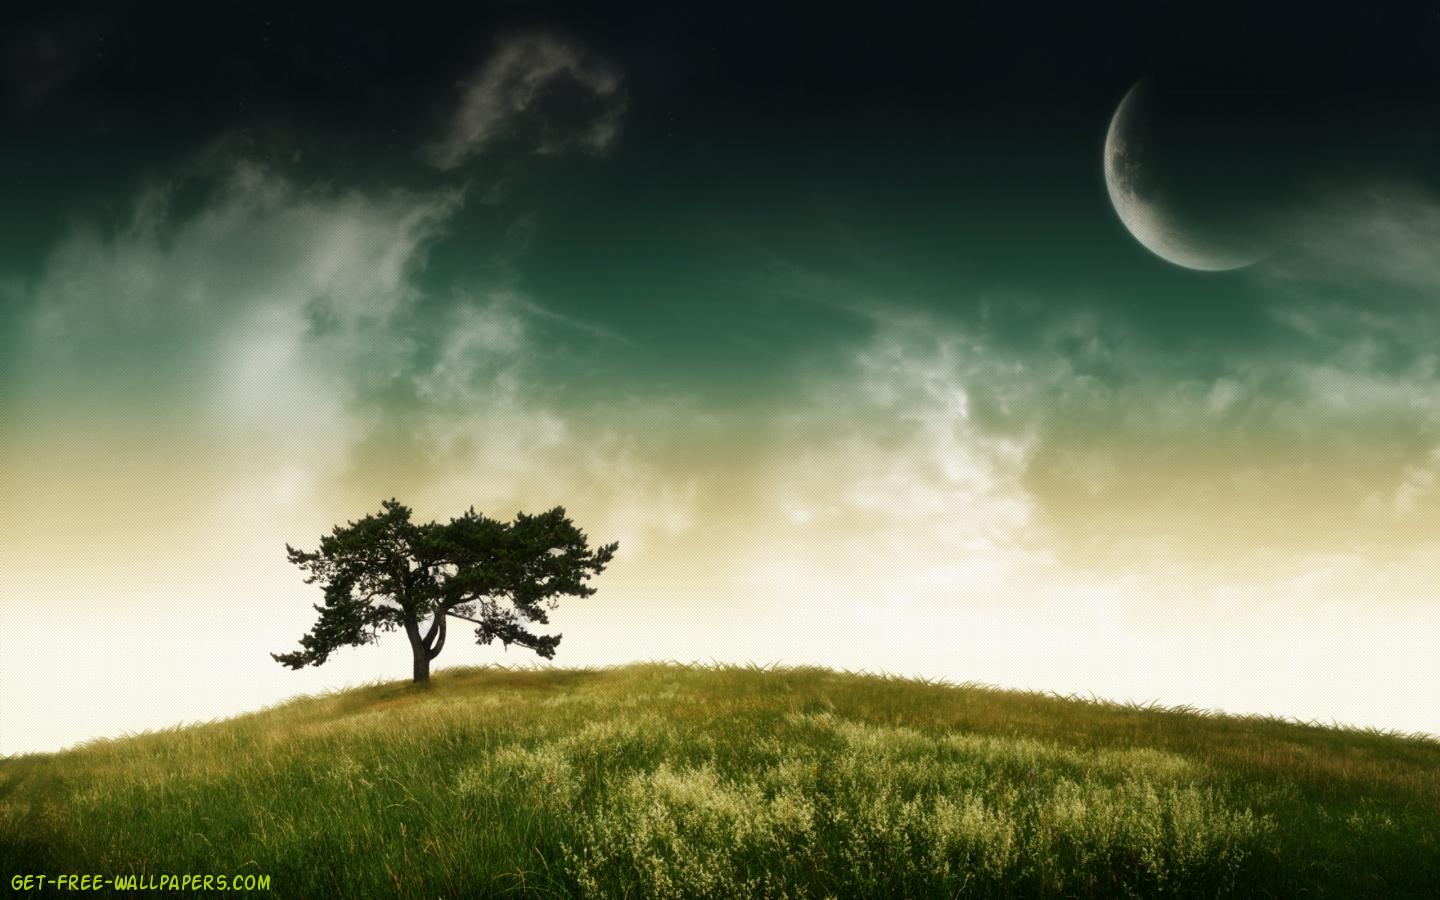 Lonely Tree Wallpaper